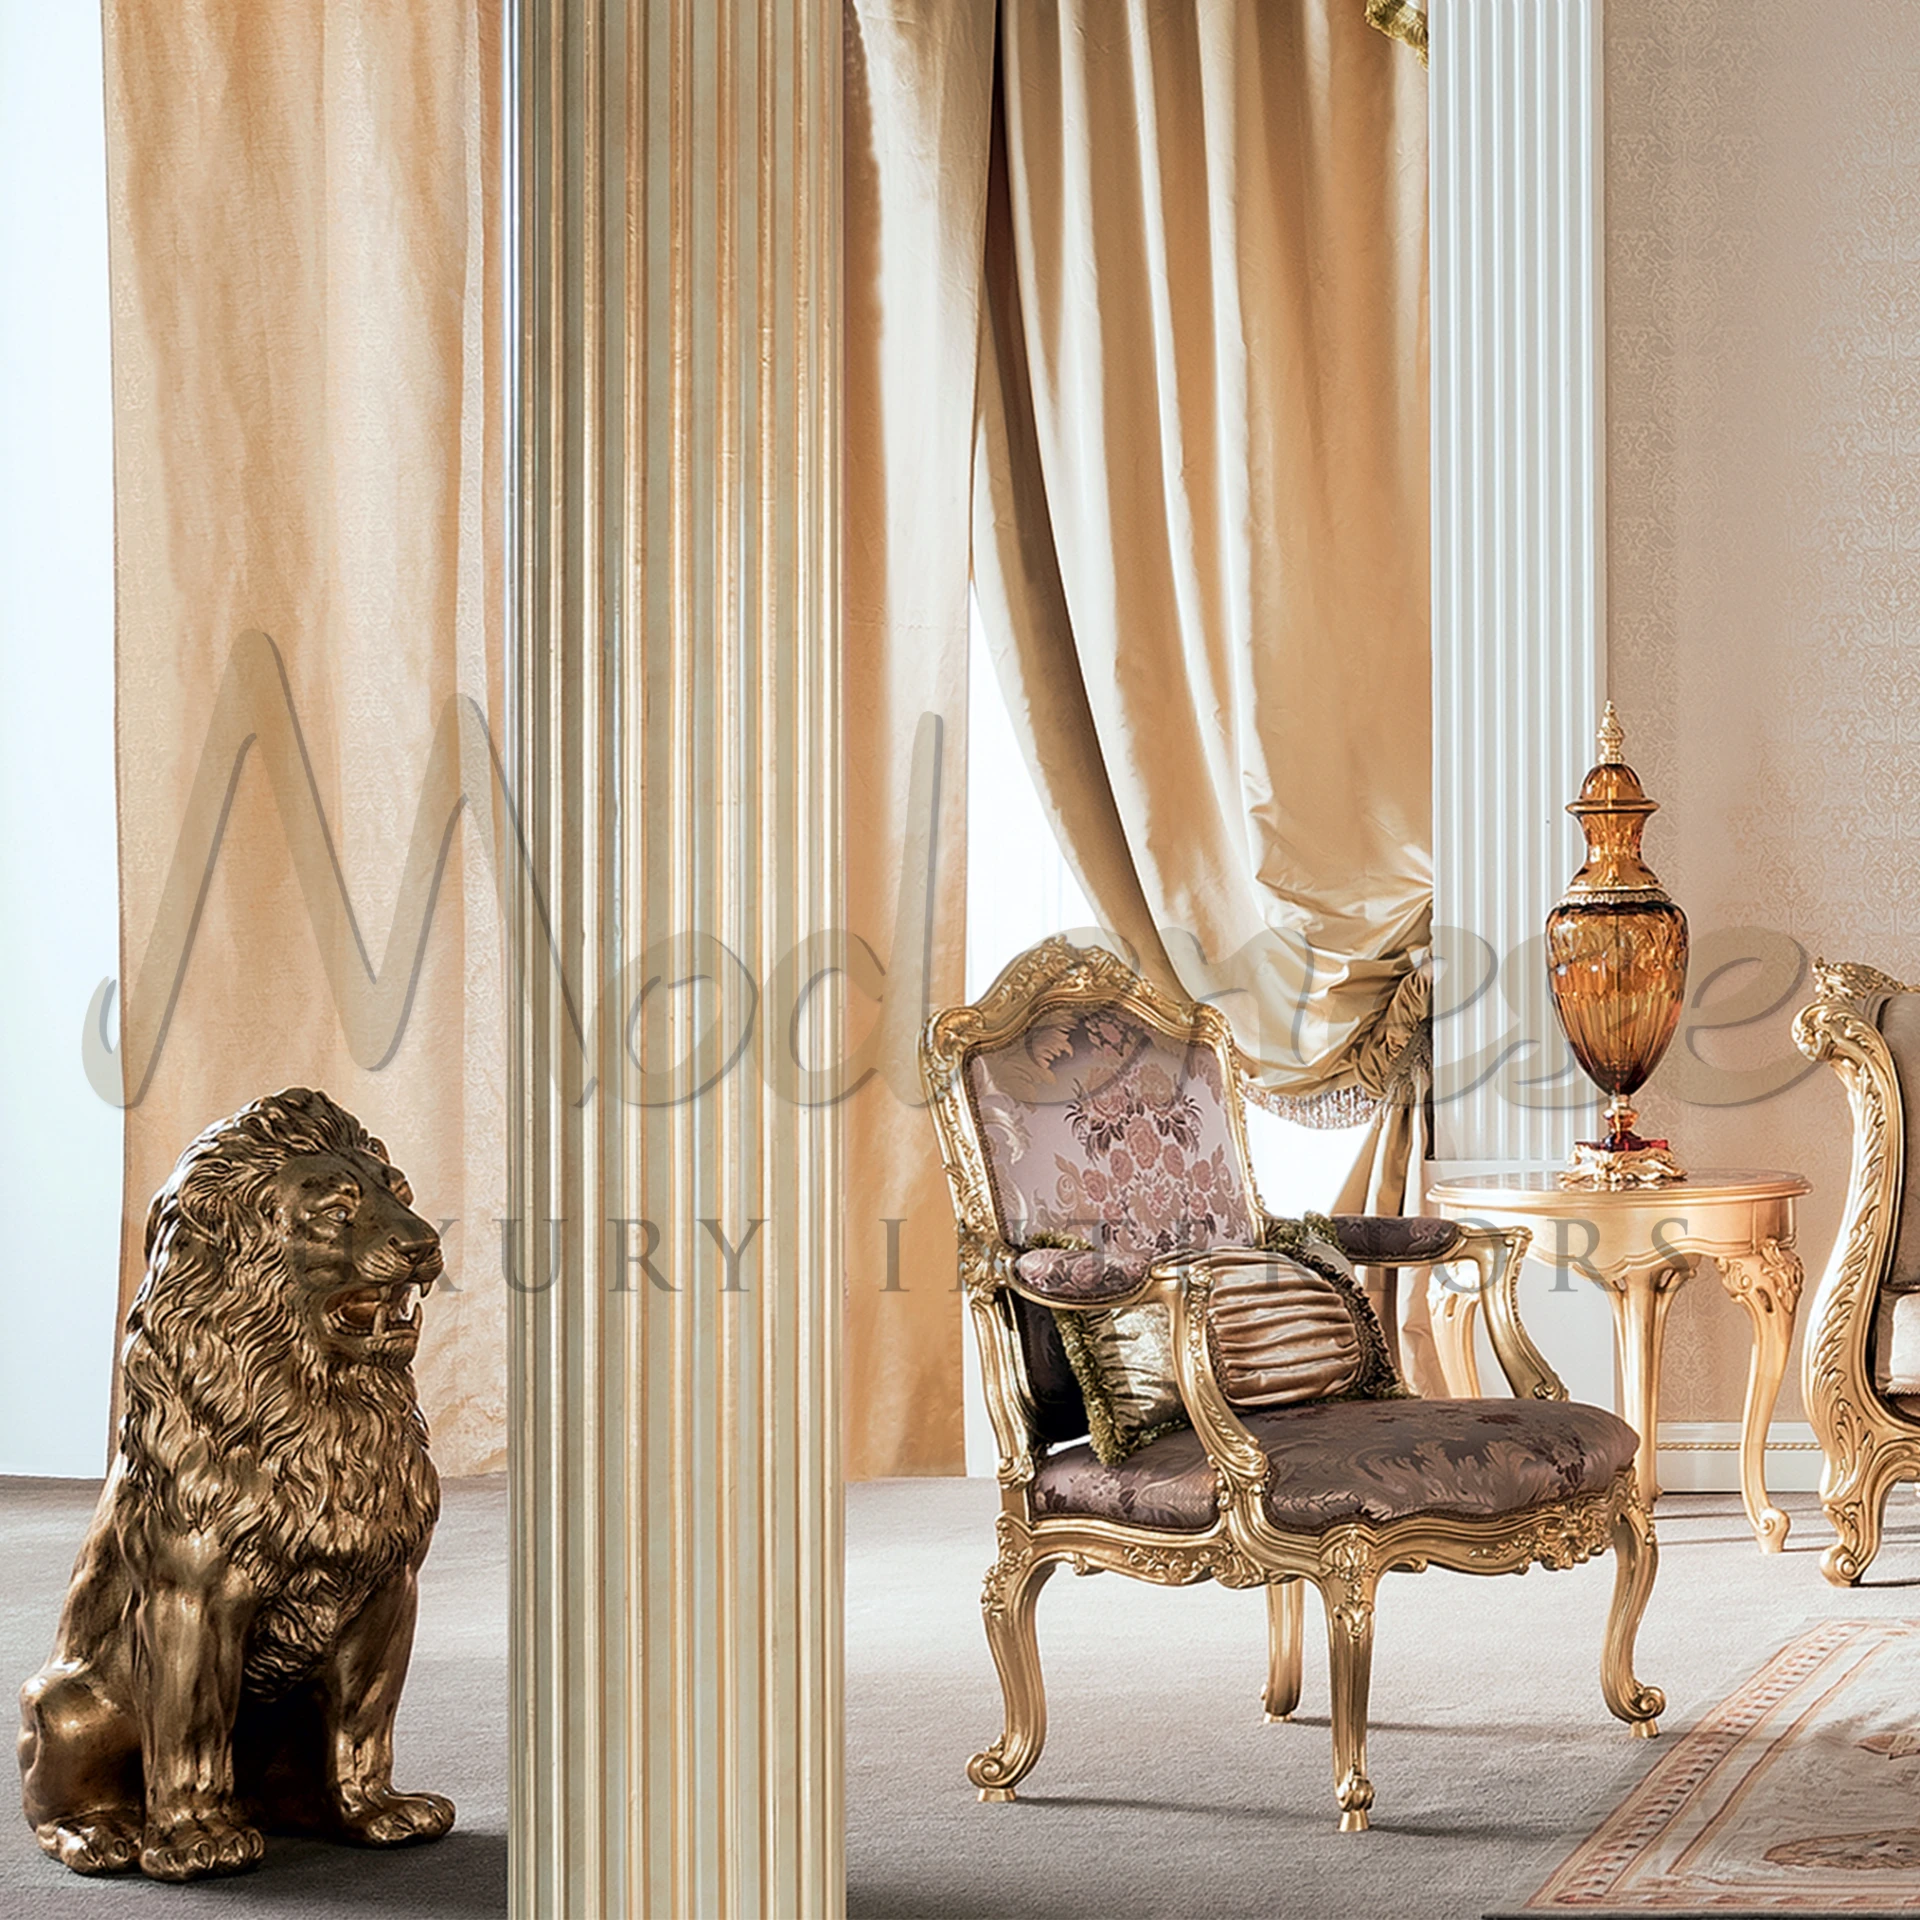 Opulent Marquetry Gold Leaf Side Table, blending hardwood and metal for a luxury coffee table design in empire style furniture settings.